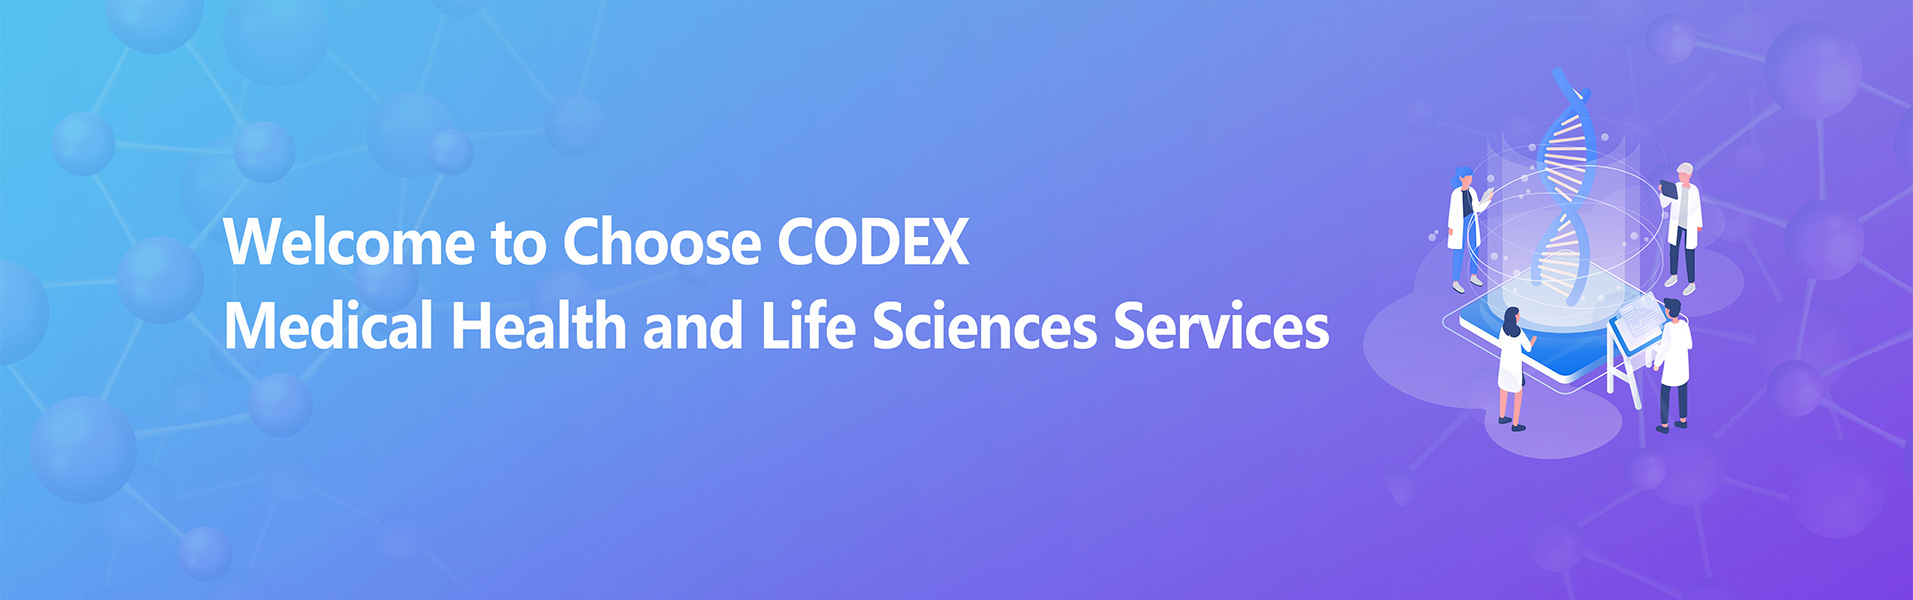 Healthcare and Life Sciences